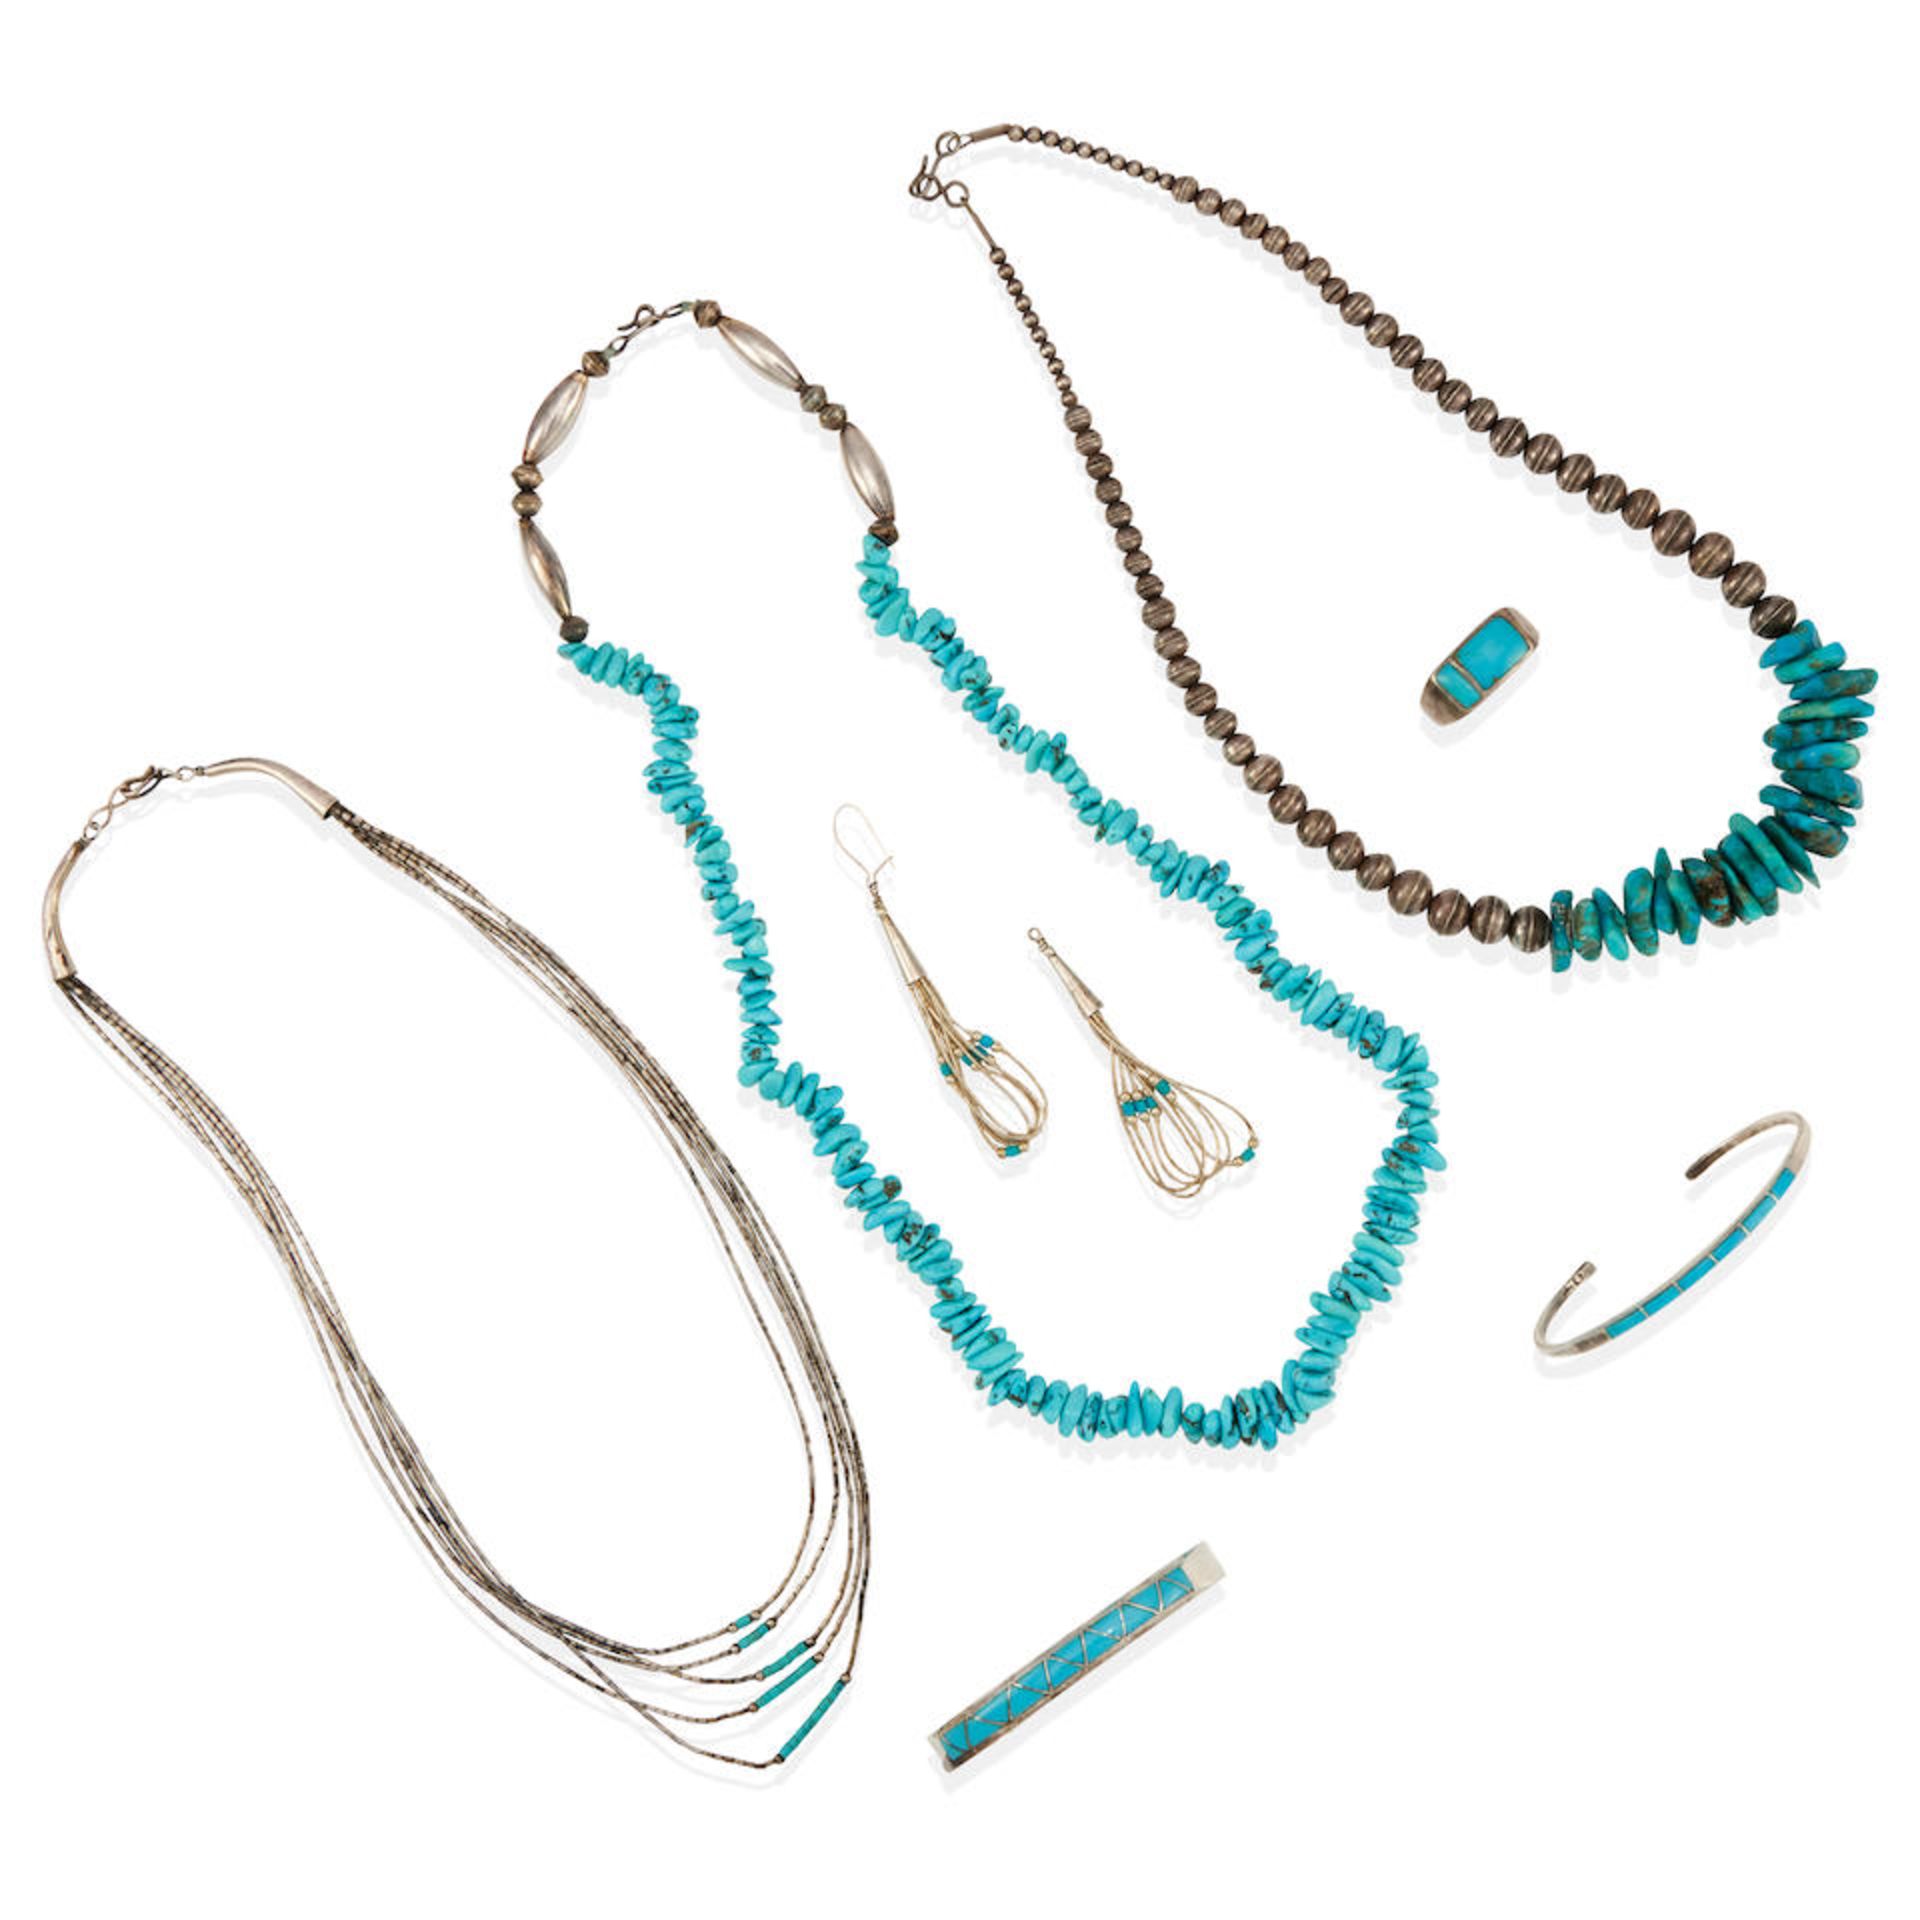 GROUP OF STERLING SILVER, COIN SILVER AND TURQUOISE JEWELRY